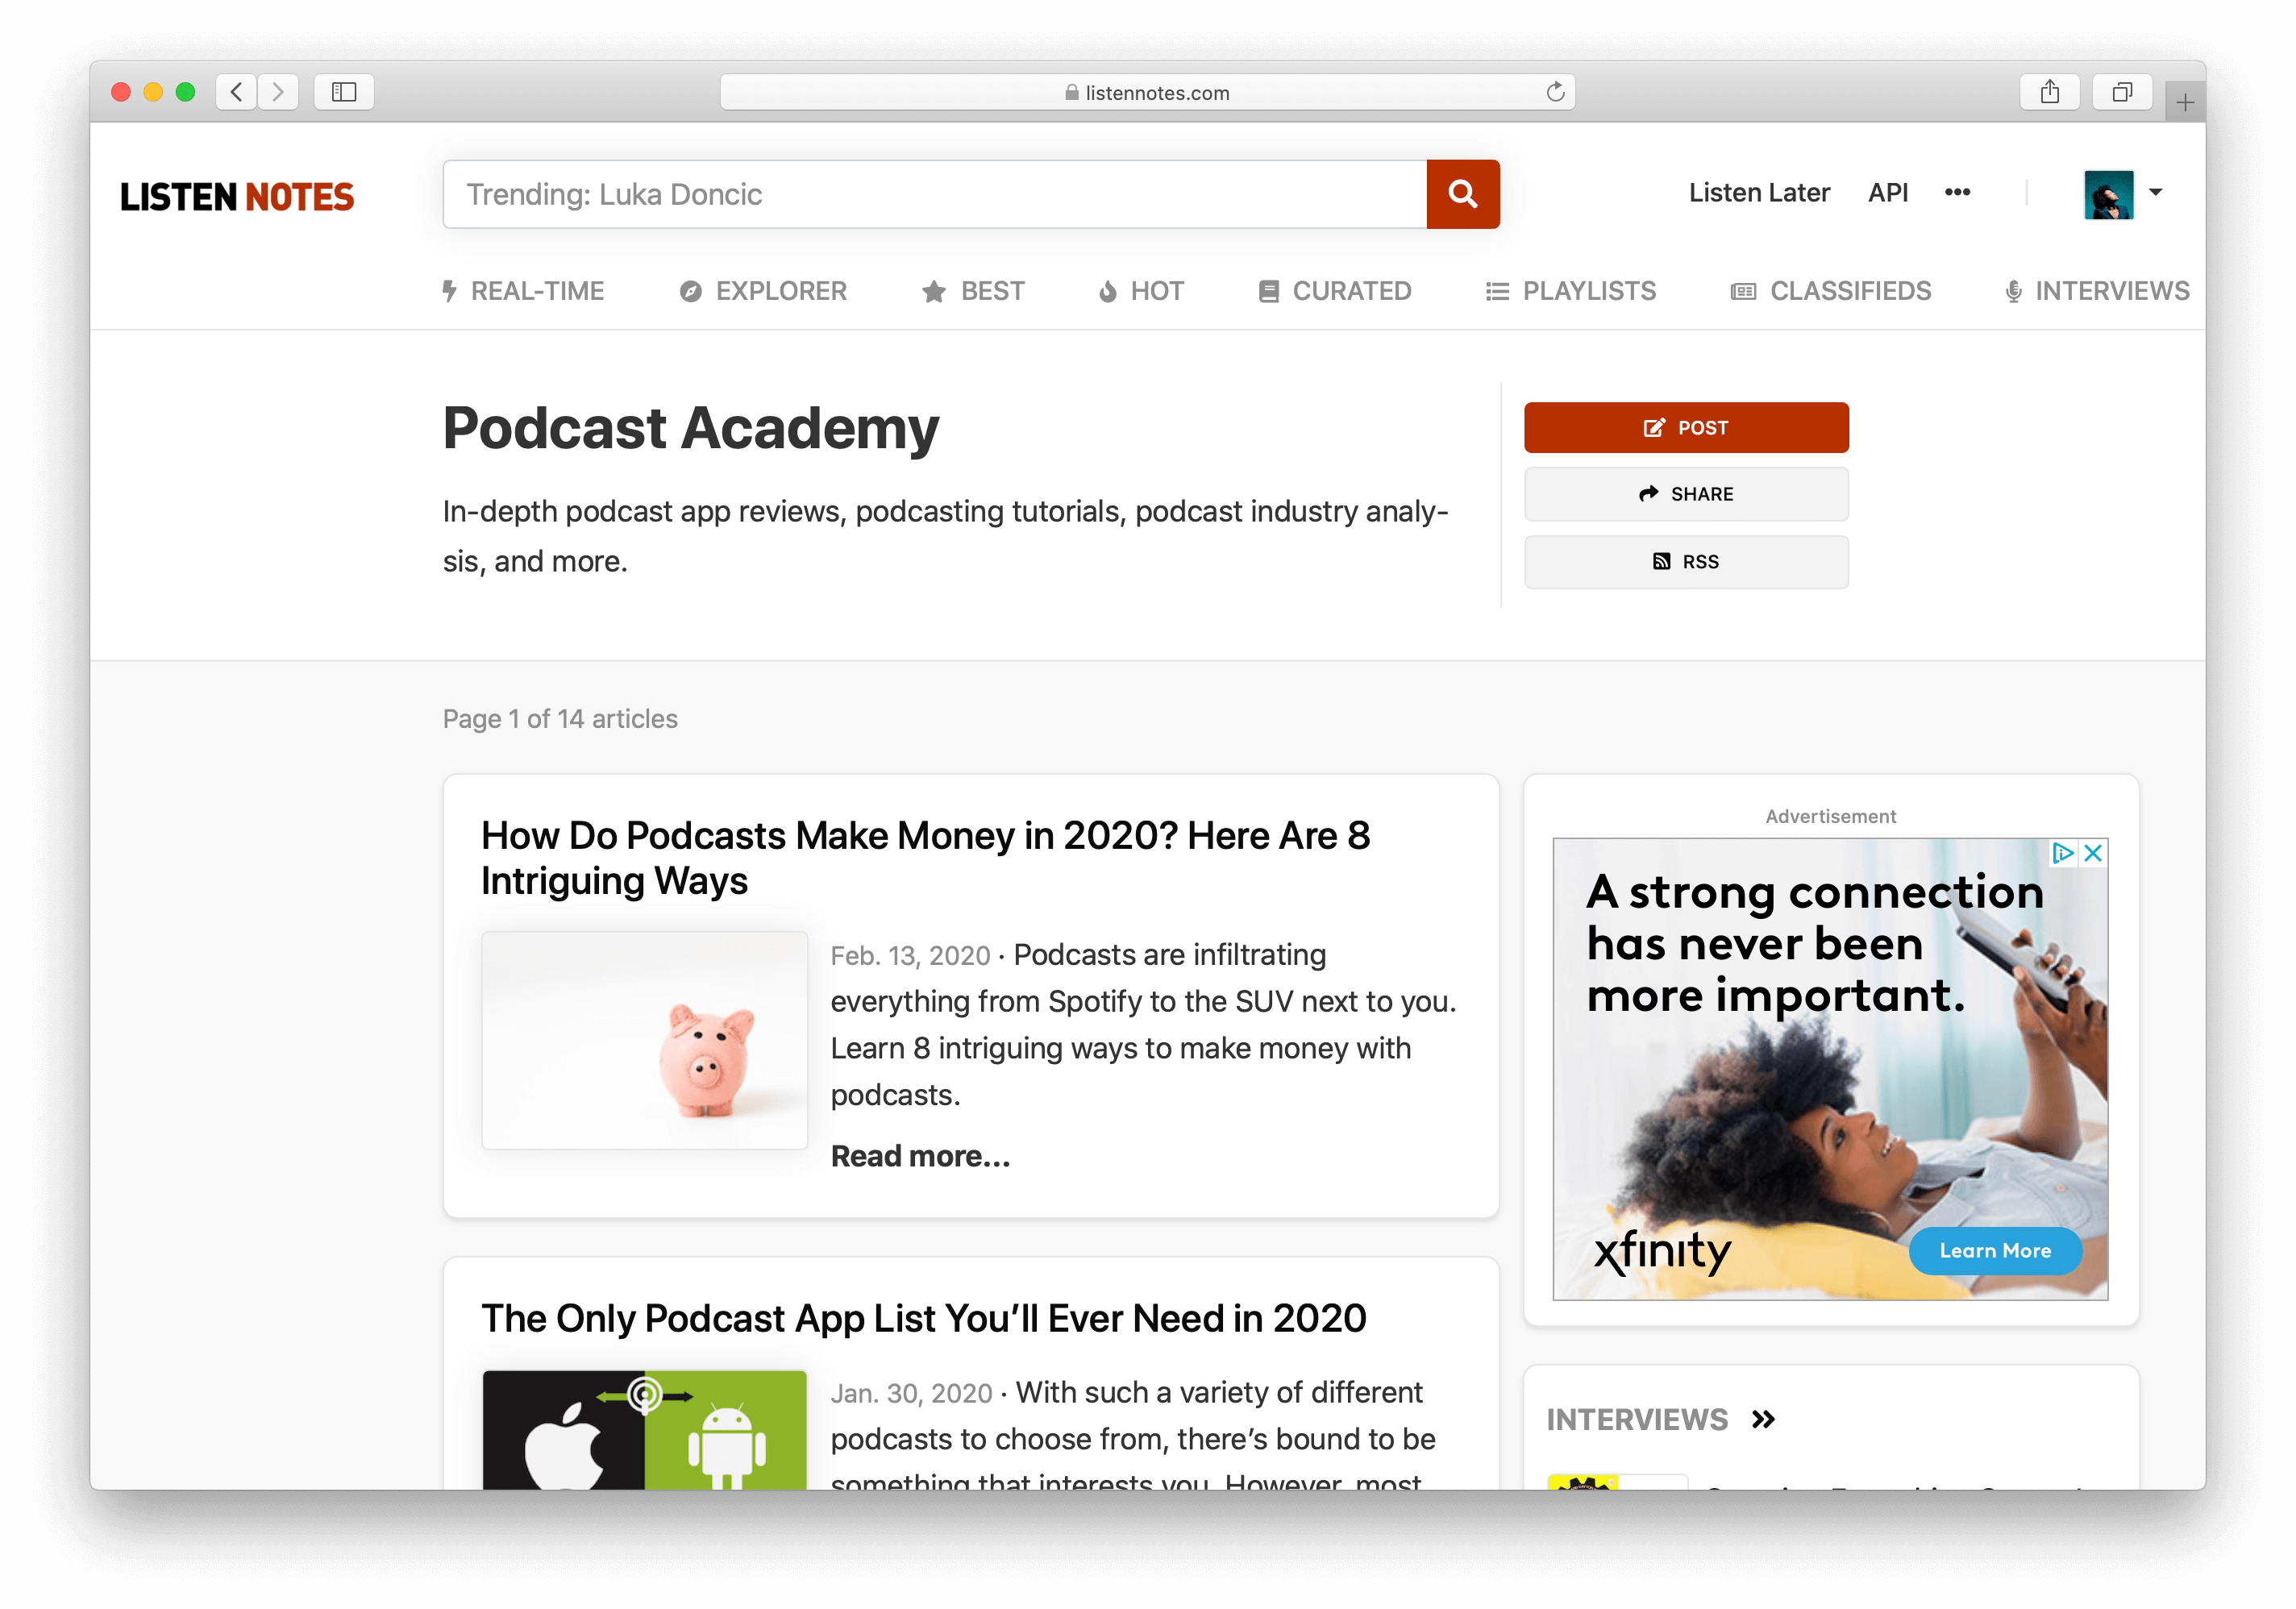 Listen Notes Podcast Academy page